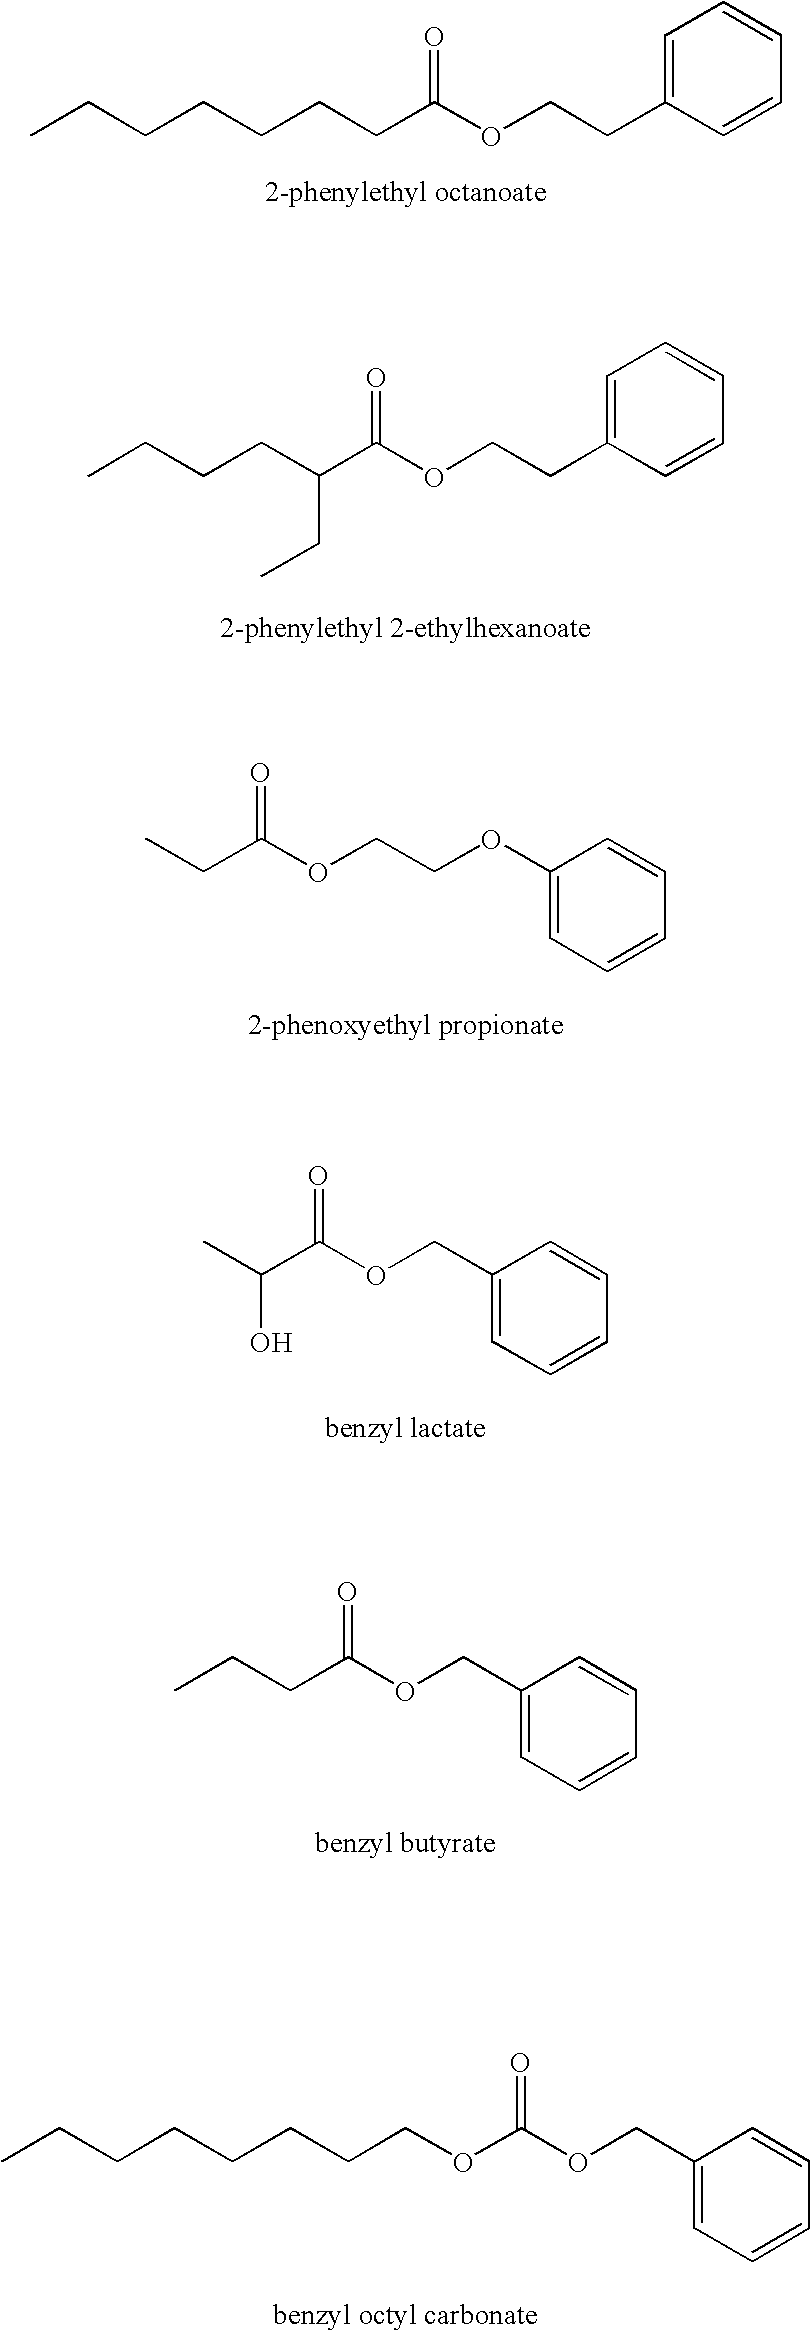 Solubilizing agents for active or functional organic compounds